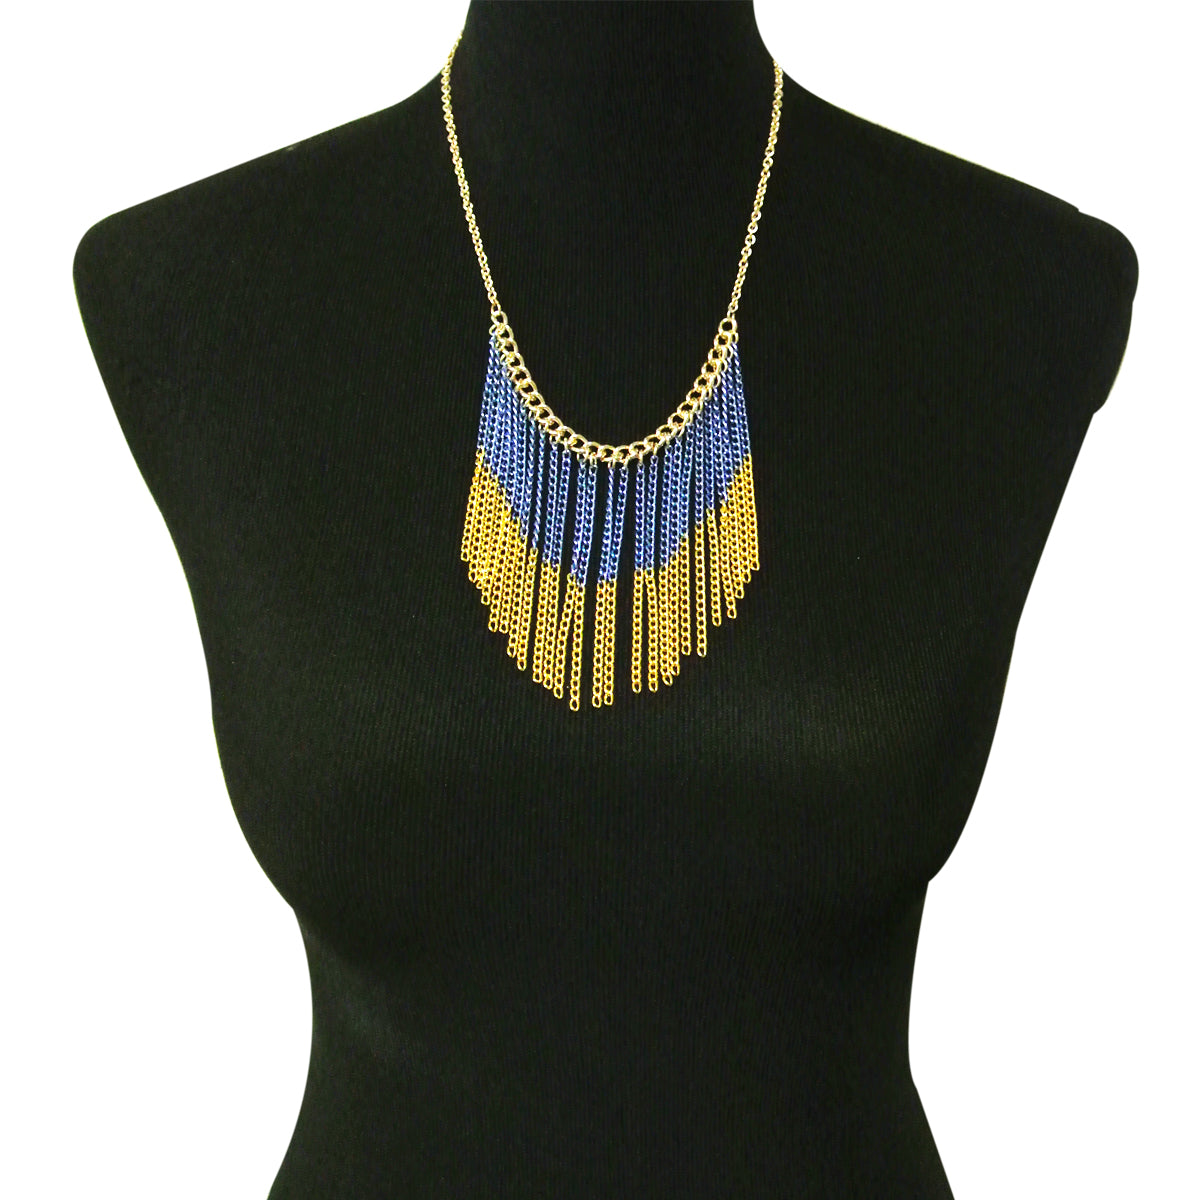 Two Toned Chain Waterfall Bib Necklace